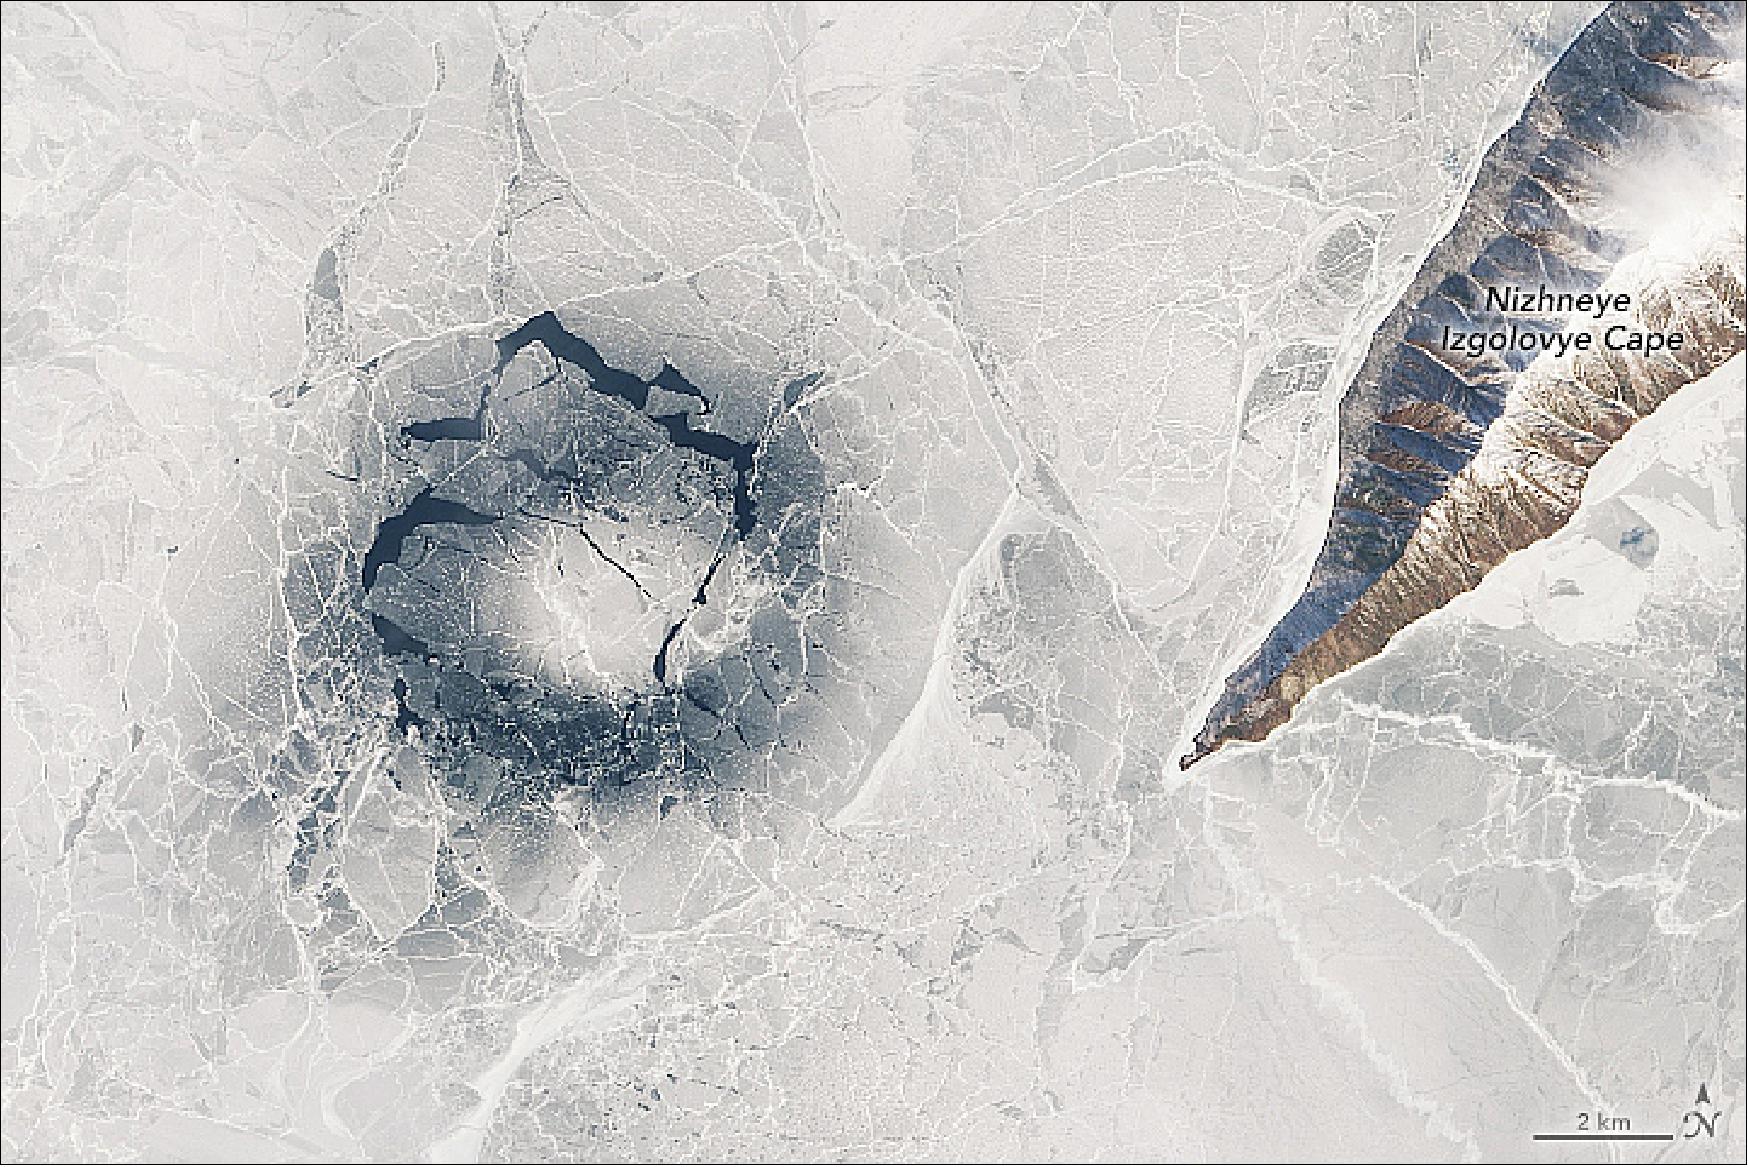 Figure 127: The puzzling features are most easily seen from above, but they pose real risks at the surface. The Landsat-8 image shows an ice ring in the central part of the lake on April 1, 2016. That ring was particularly well-studied because Kouraev and colleagues were nearby, taking measurements of the ice and underlying water. The thin ice of the ring appears darker and more transparent than the whiter, thicker ice surrounding it (image credit: NASA Earth Observatory, image by Lauren Dauphin, using Landsat data from the U.S. Geological Survey. Story by Adam Voiland)